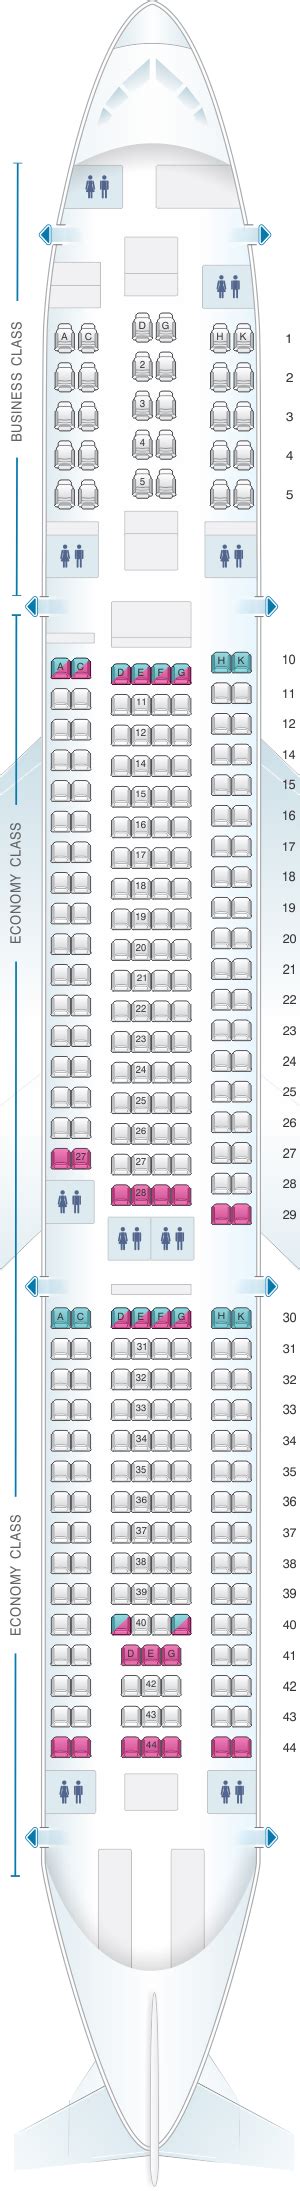 Seat Map Asiana Airlines Airbus A330 300 275pax Air T